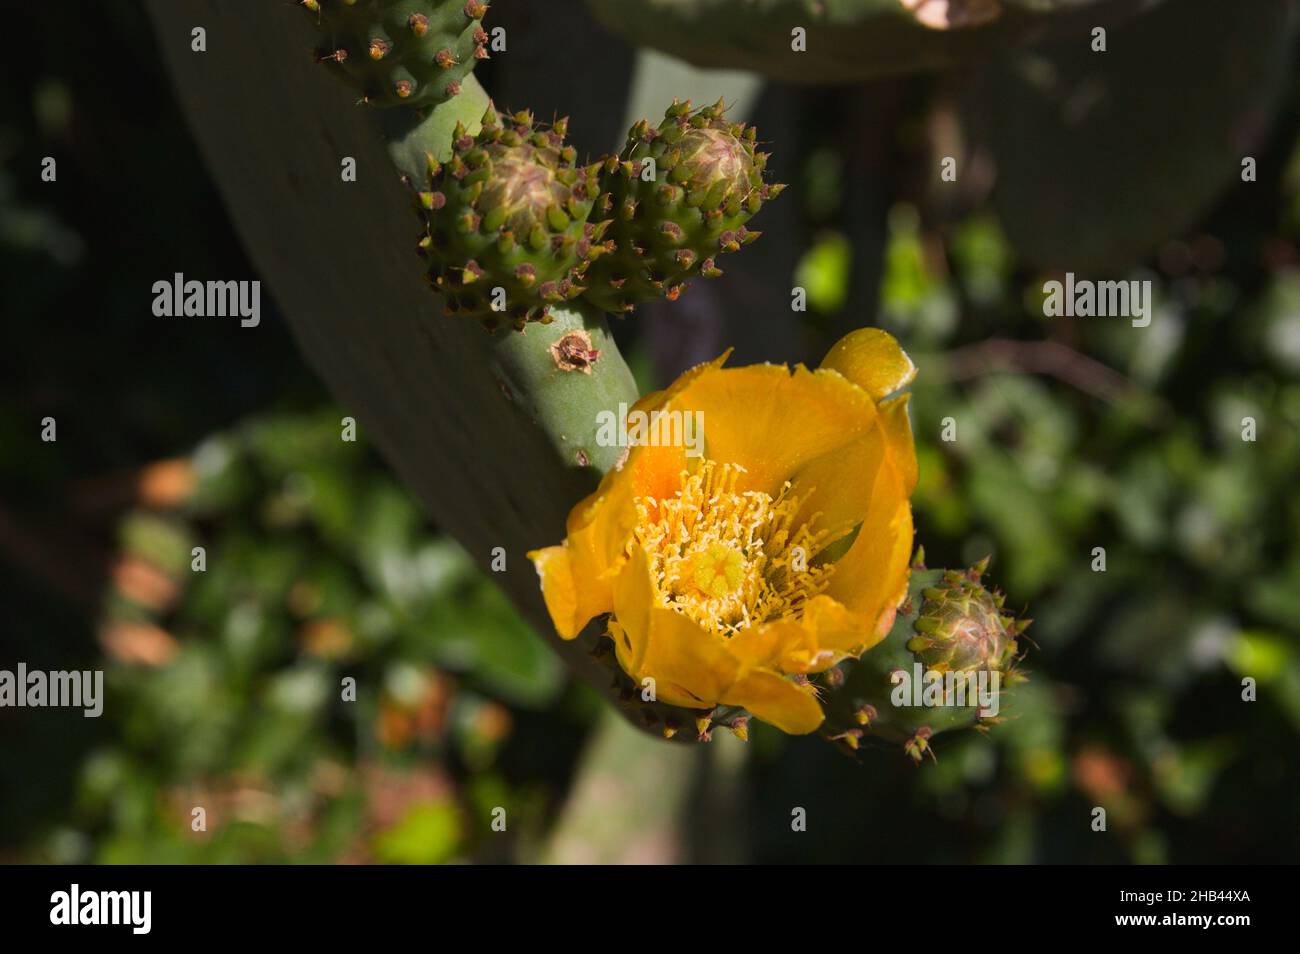 Close-up of the inside of the orange colored flower of a prickly pear (Opuntia ficus-indica) specimen Stock Photo